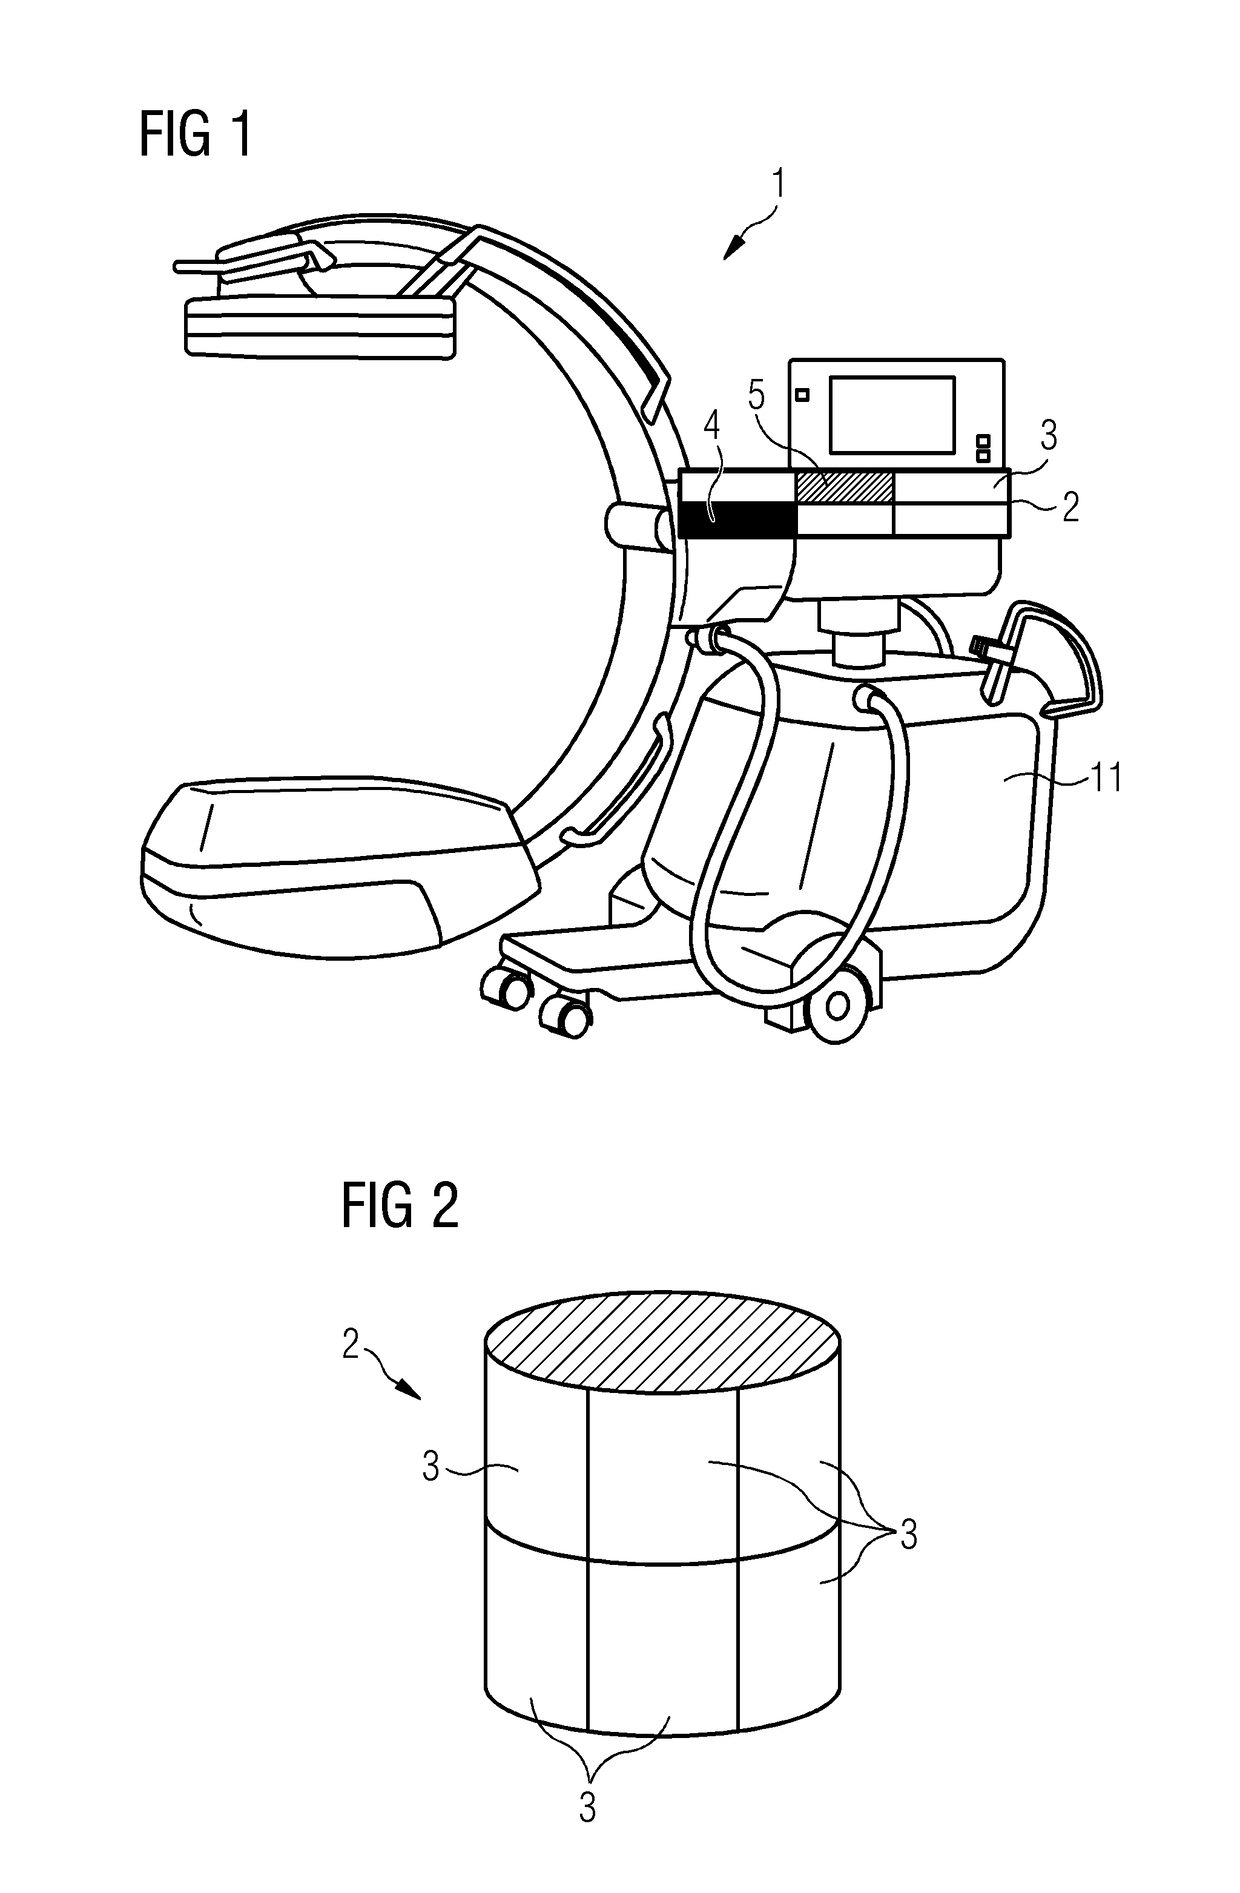 Motorized medical device and method for operating such a device